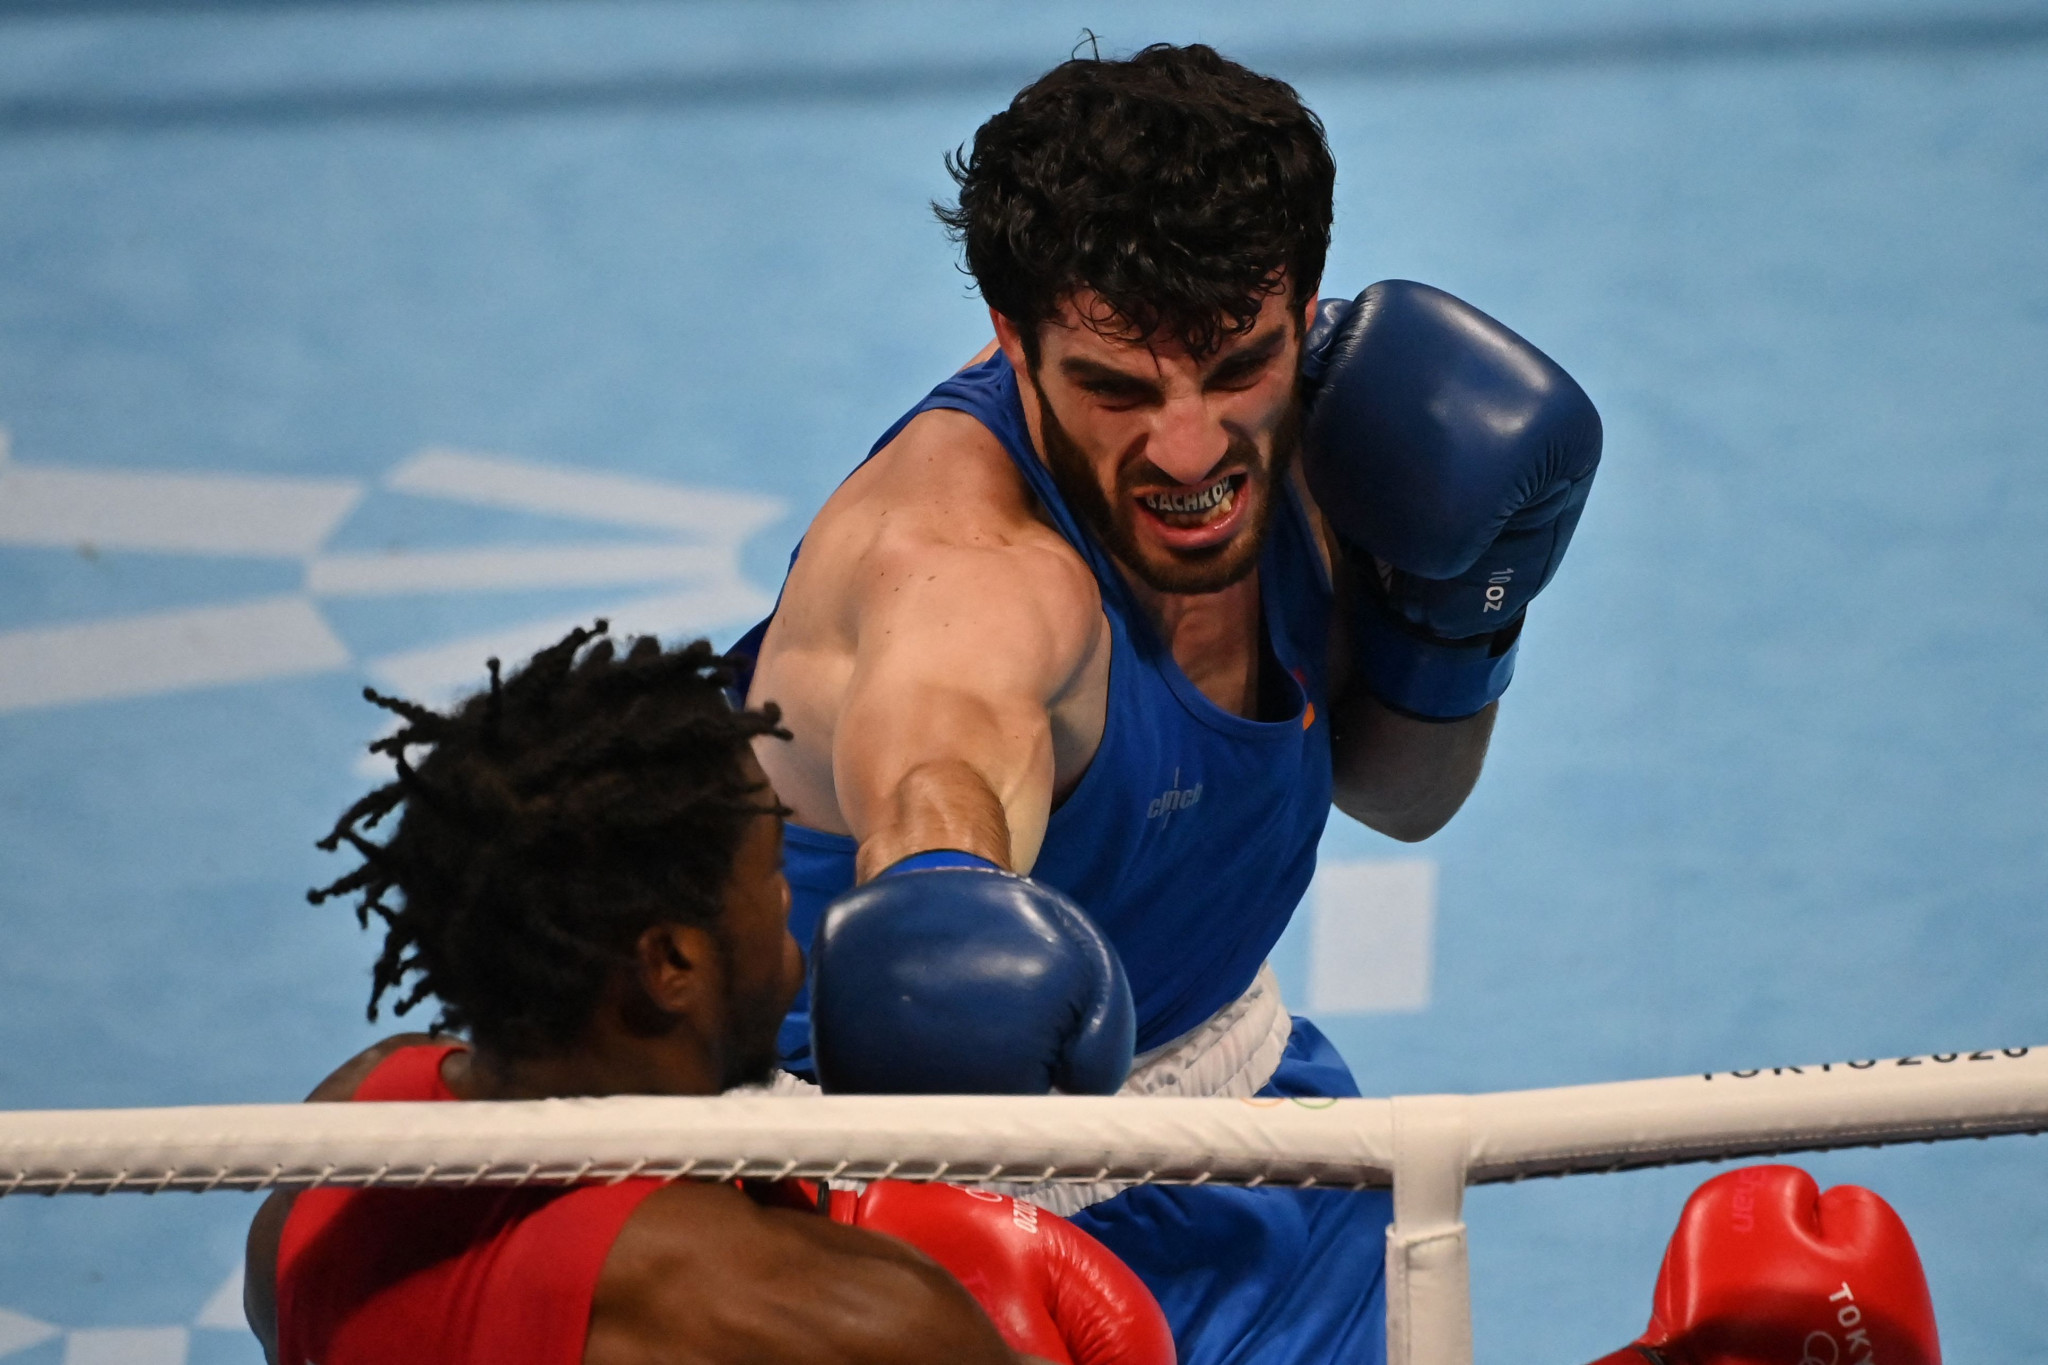 Hovhannes Bachkov claimed his third European title today in Yerevan ©Getty Images